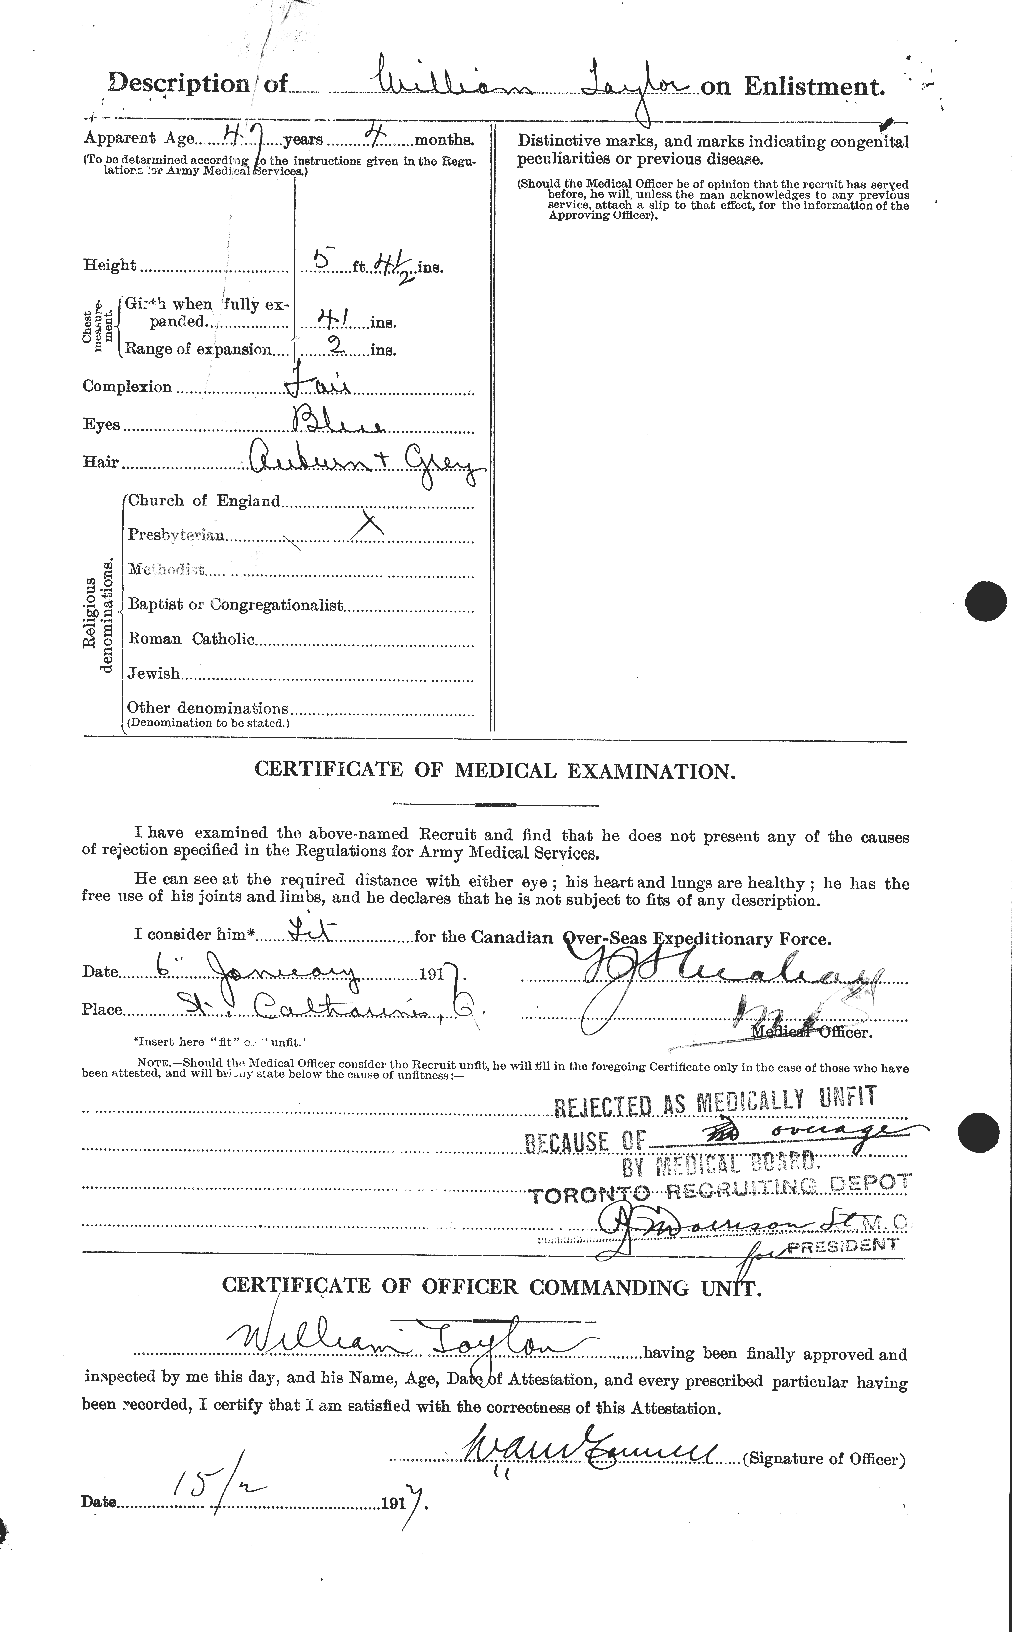 Personnel Records of the First World War - CEF 628139b